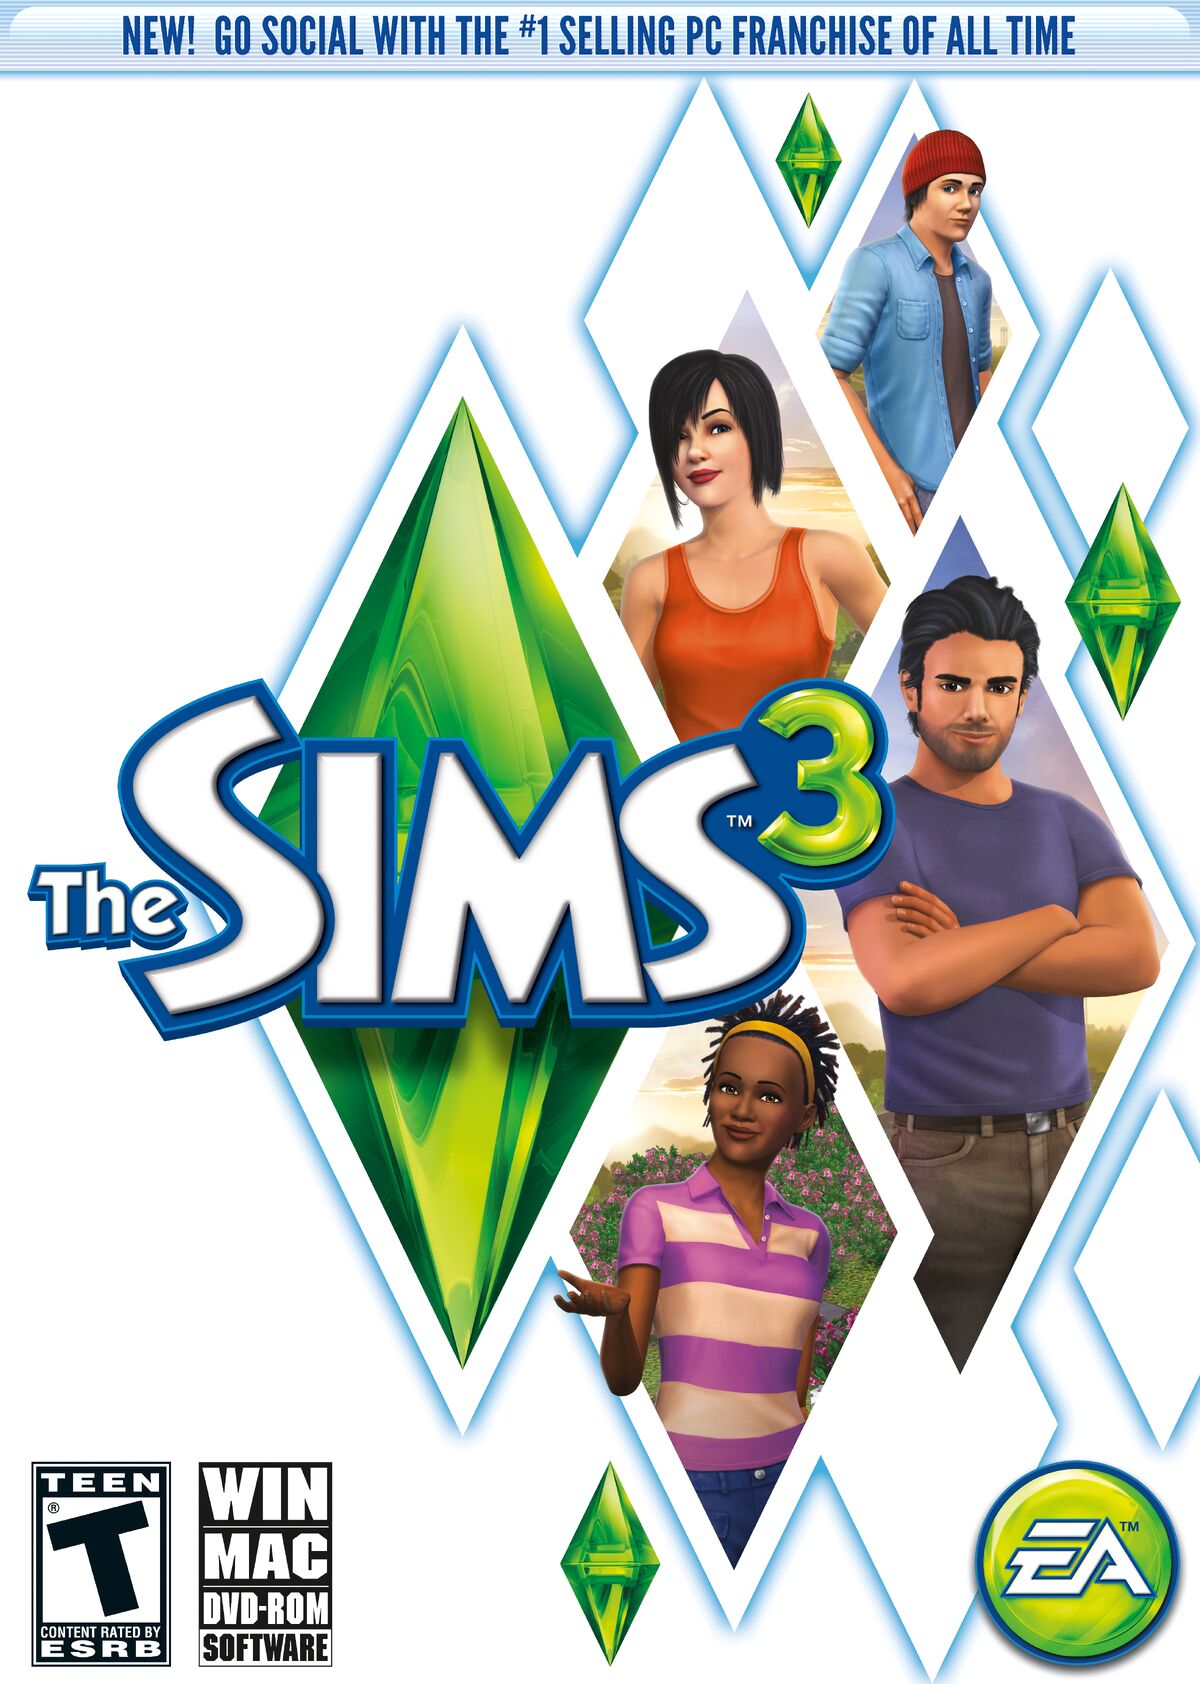 OFFICIAL LEAK: Next Sims 4 Game Pack Icon Revealed